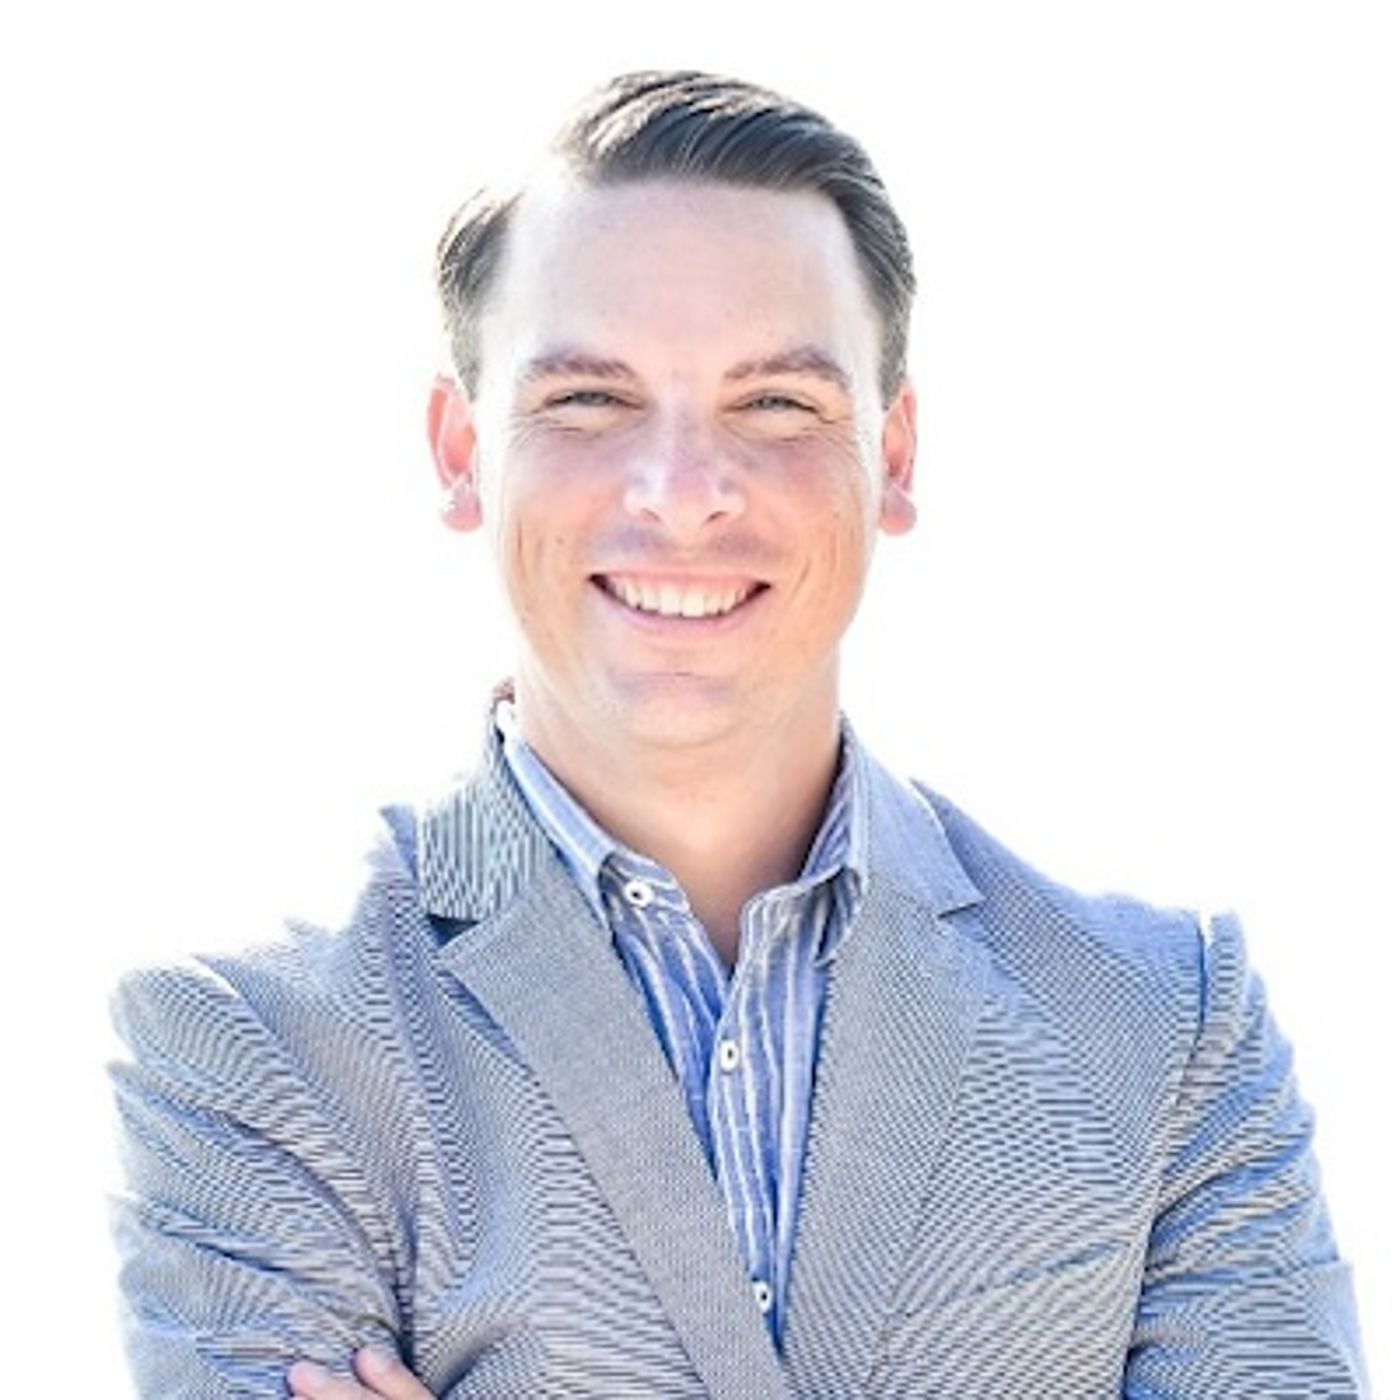 Interview with Chris Hervochon, Founder of Better Way CPA: Accounting for Marketing Agencies and Nonprofit Organizations